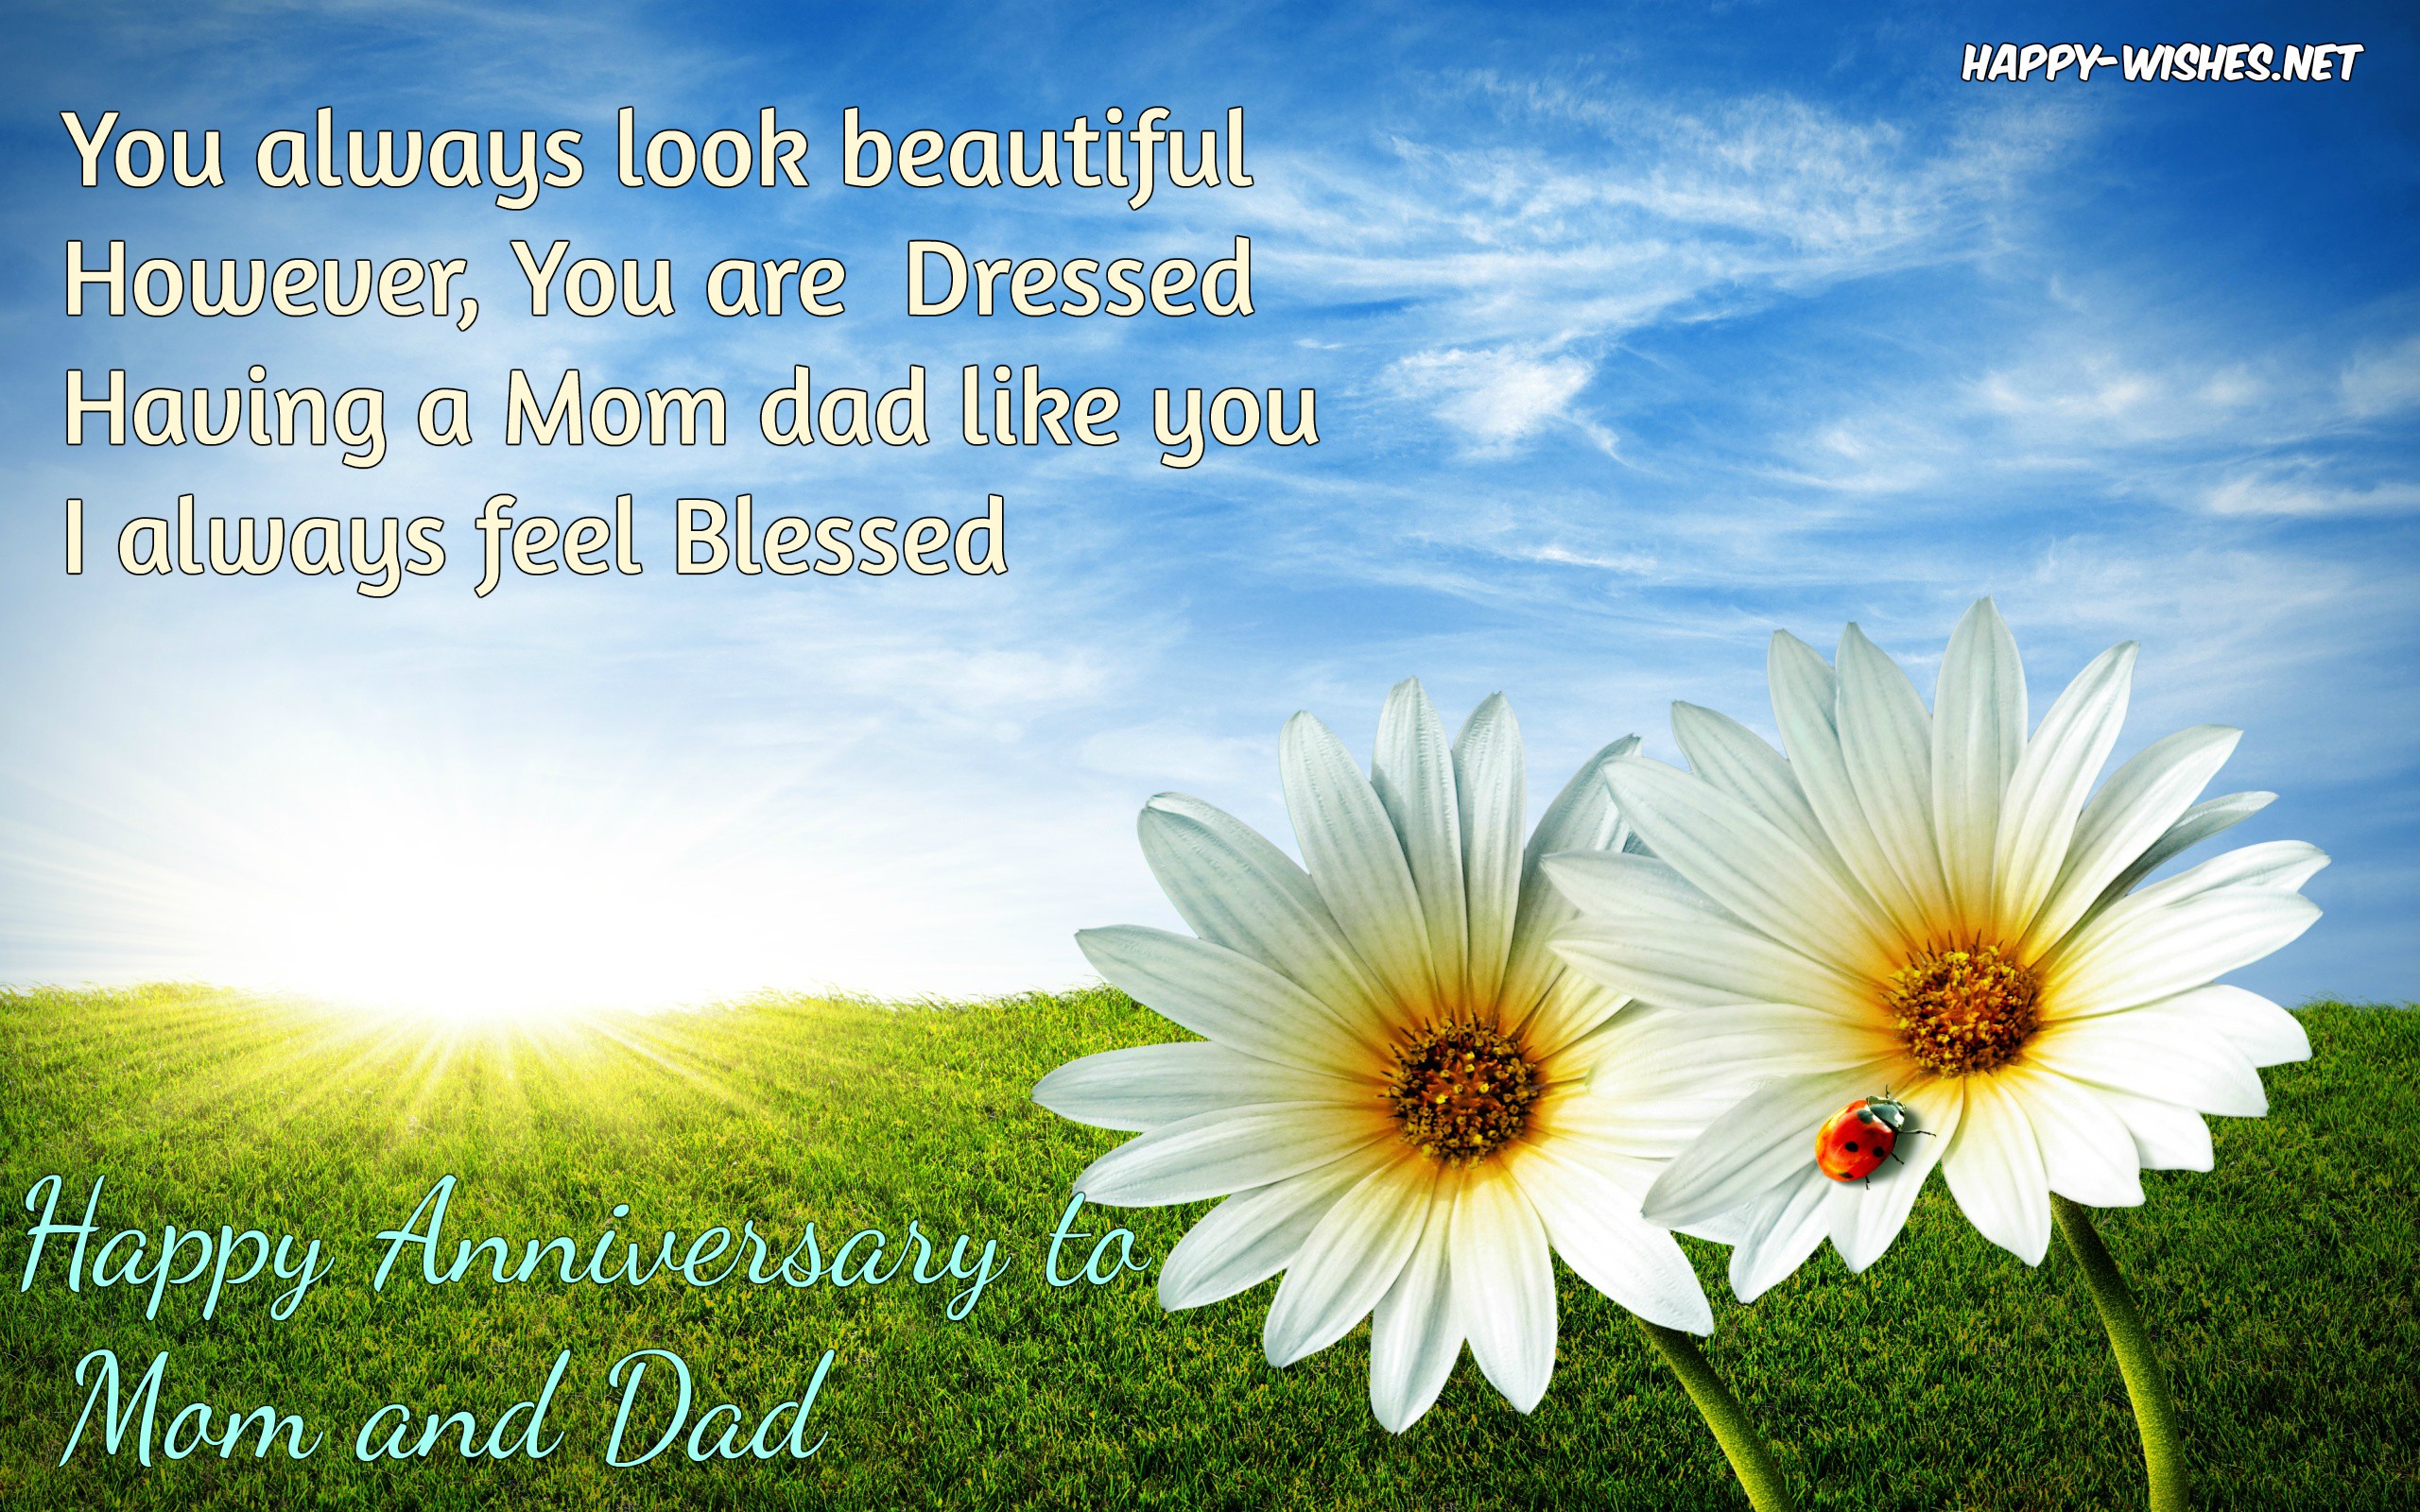 Happy Anniversary Wishes For Parents (Mom and Dad)